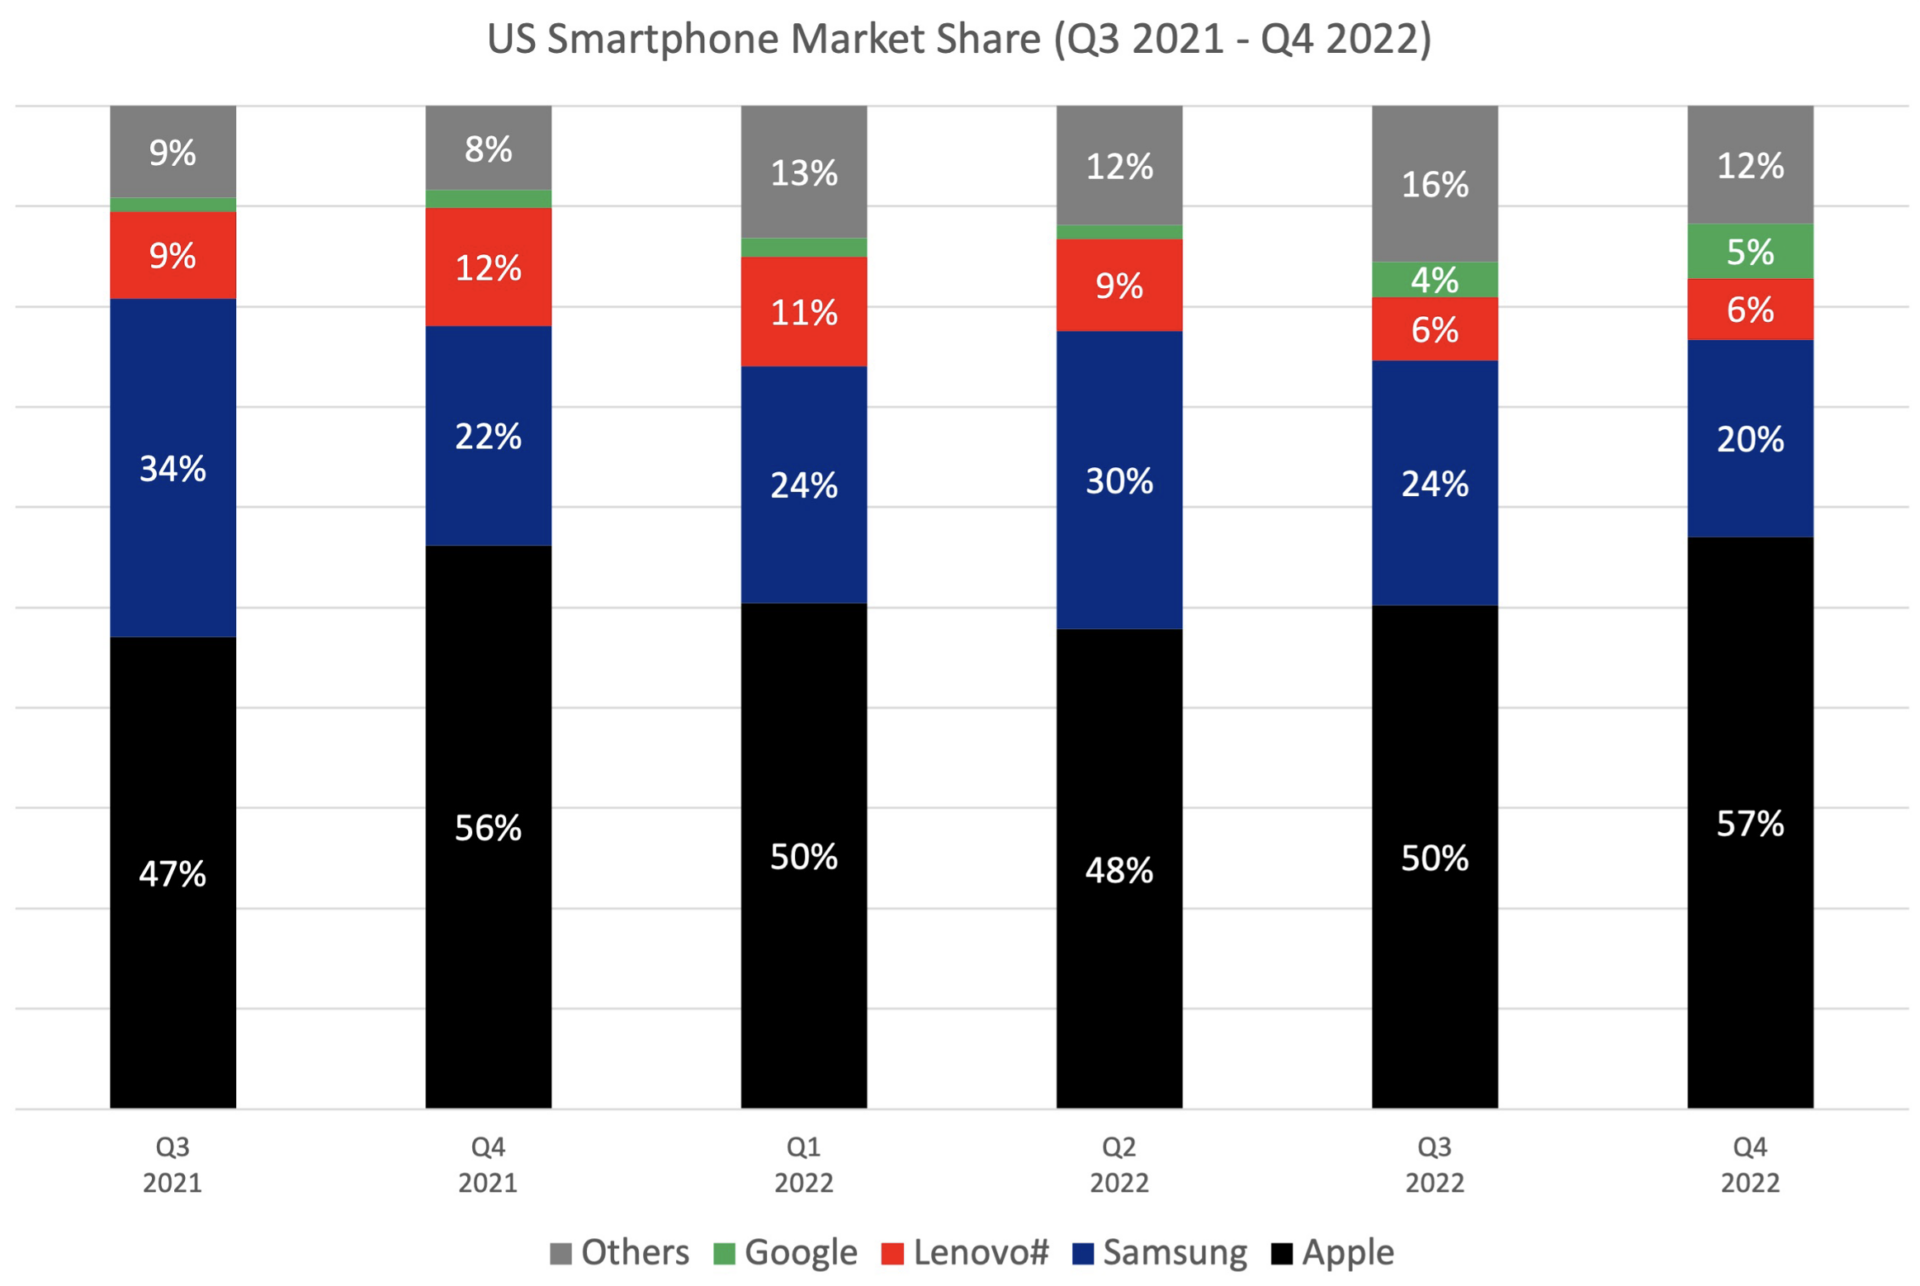 Counterpoint US Smartphone Market Share